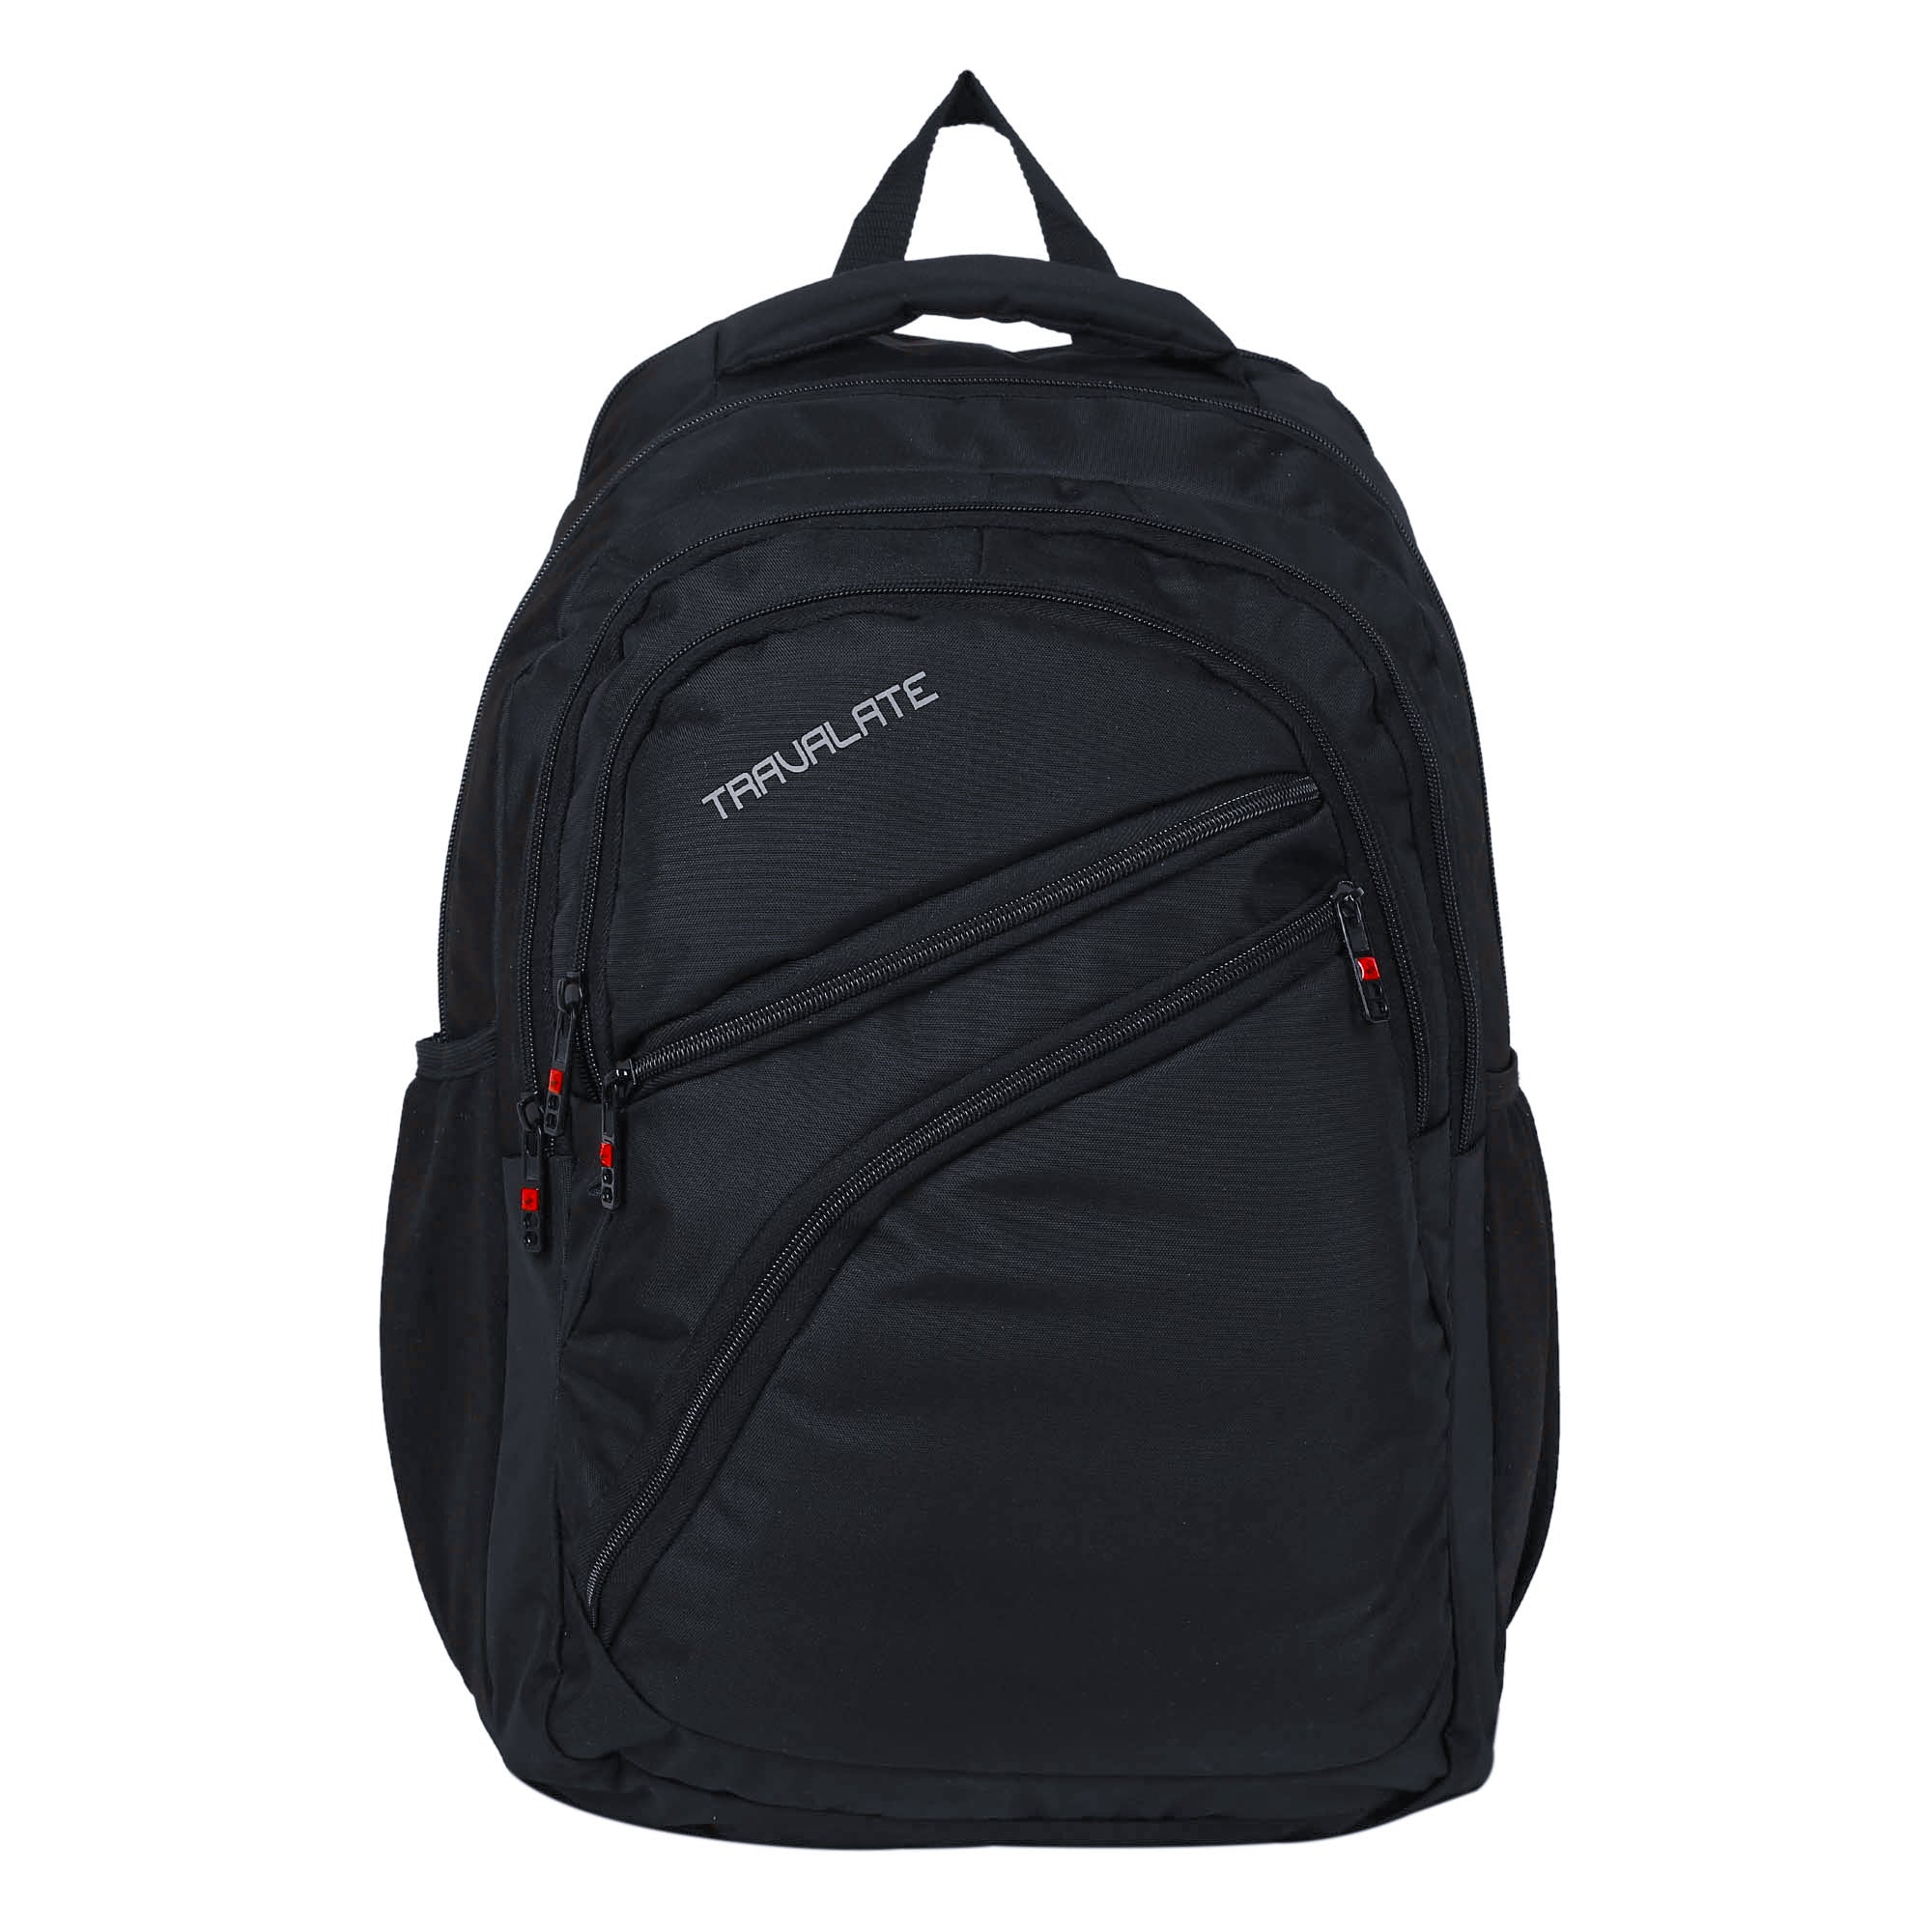 Laptop Backpack with Rain Cover | Black